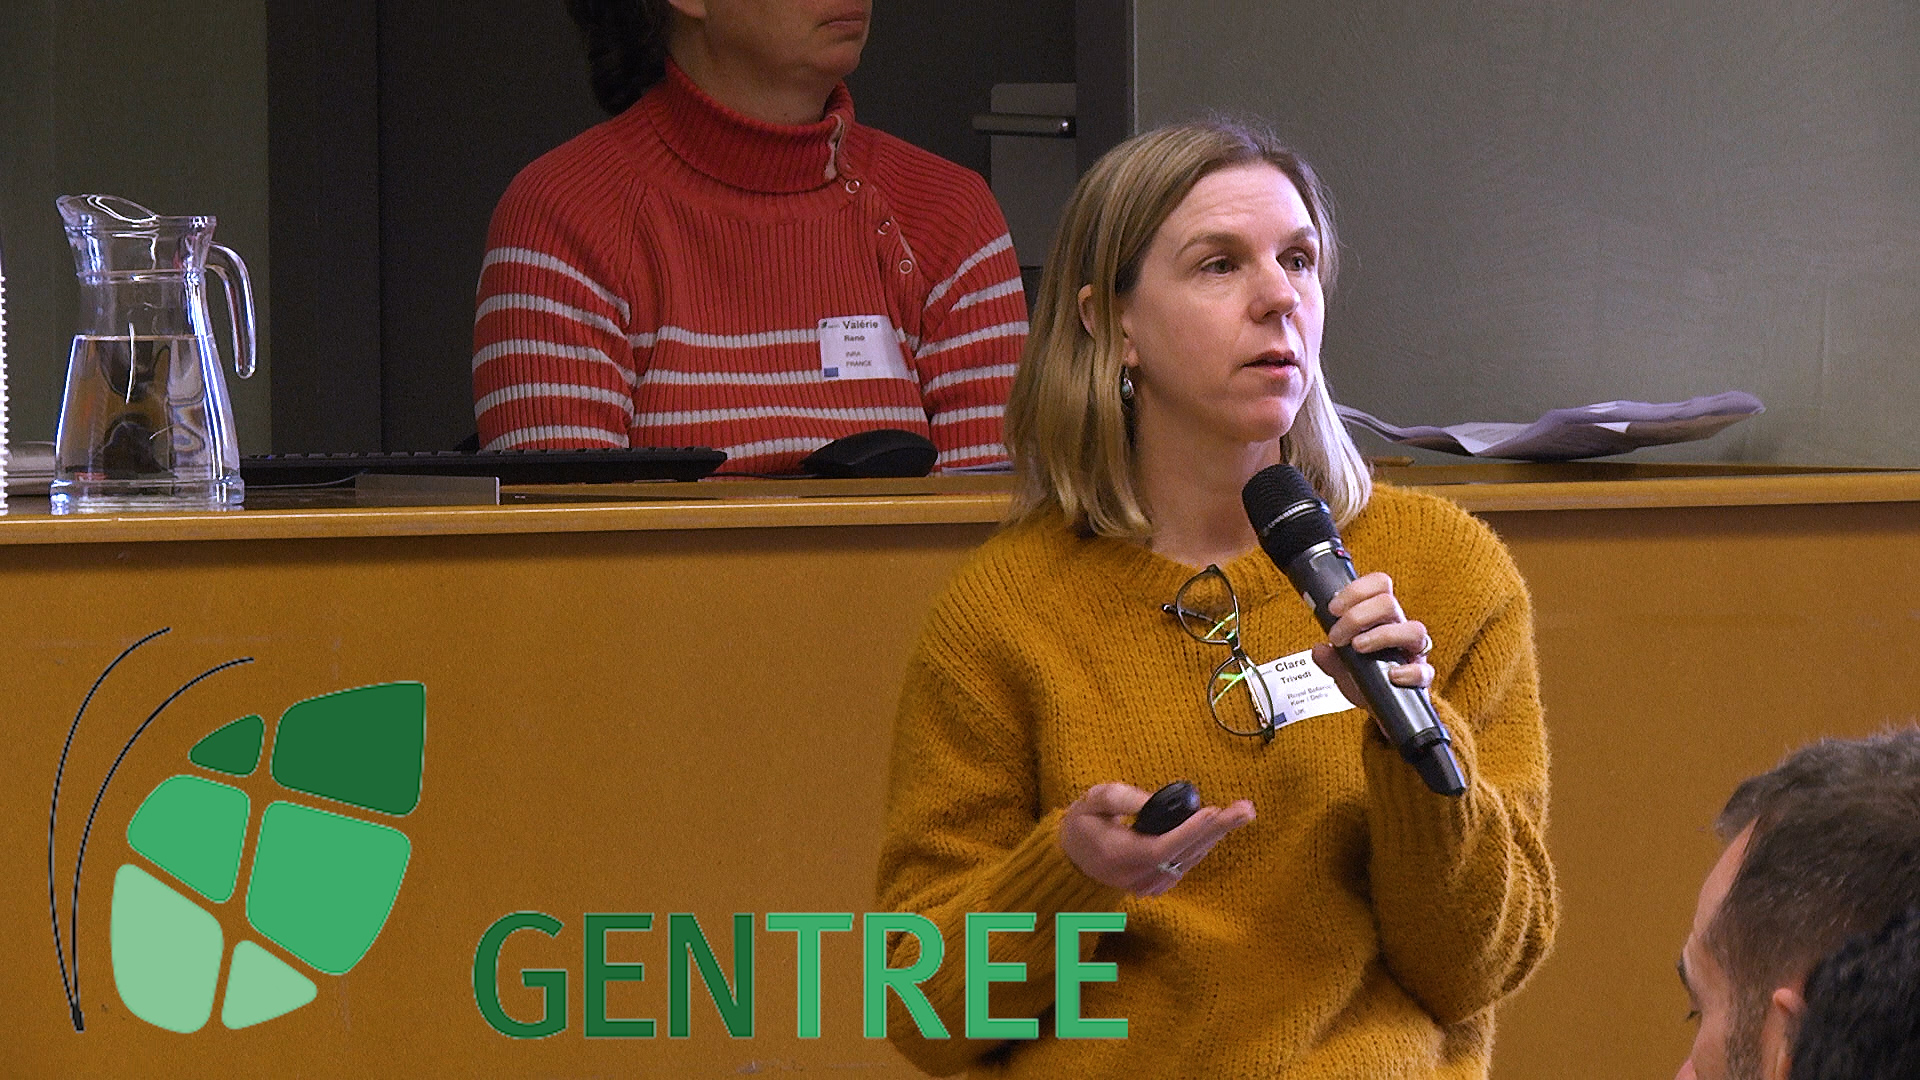 [COLLOQUE] GENTREE Final Conference 27-31 January 2020 séance 23